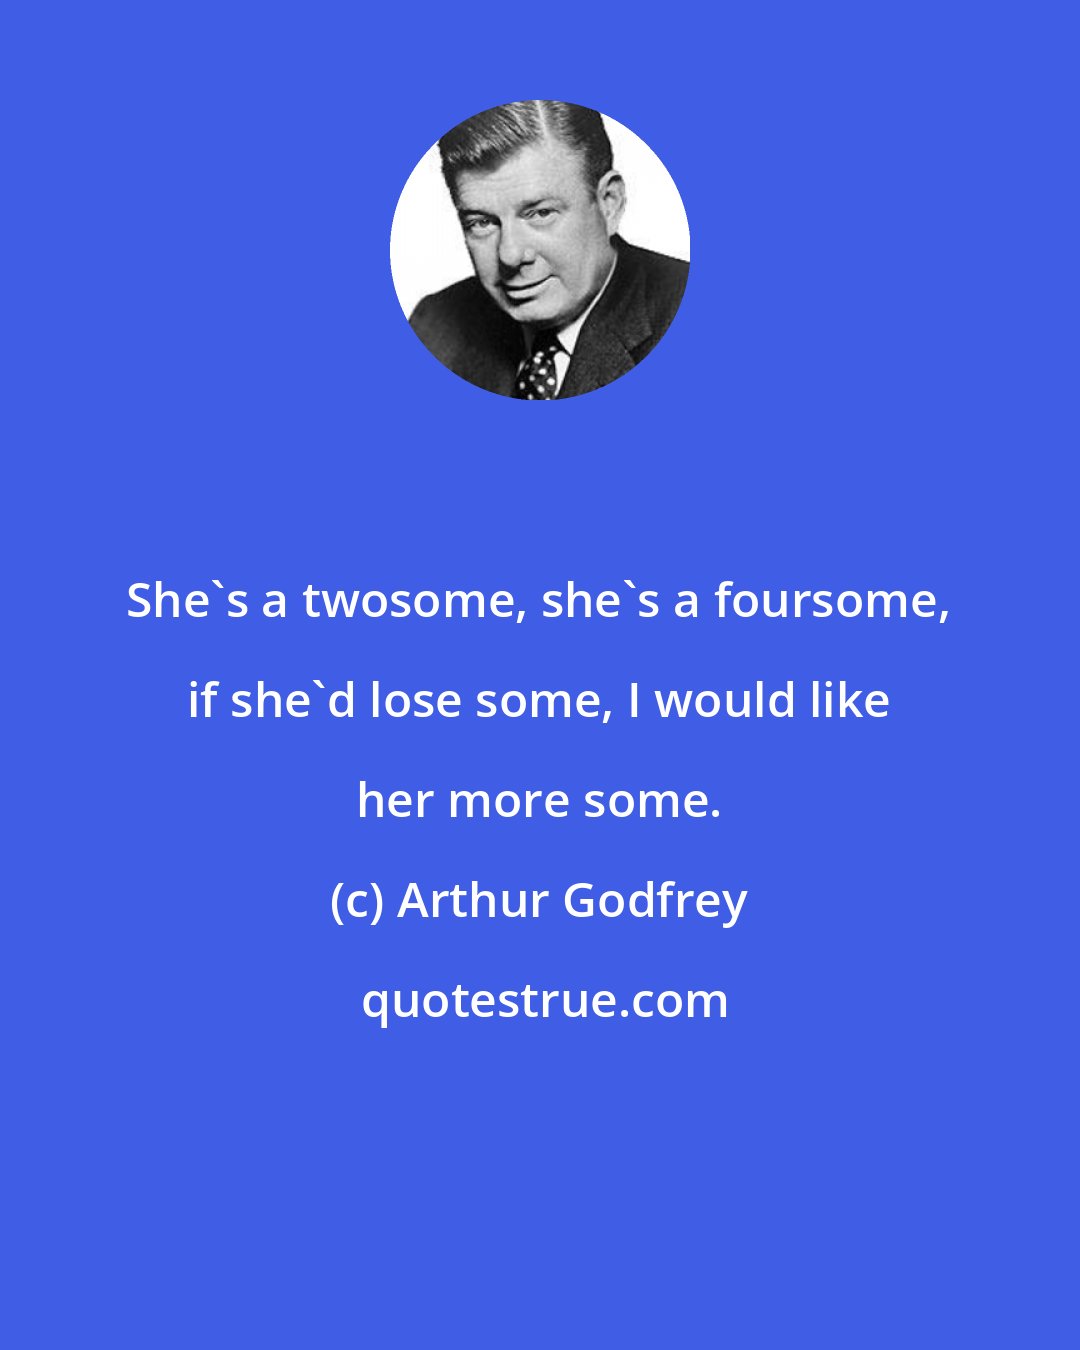 Arthur Godfrey: She's a twosome, she's a foursome, if she'd lose some, I would like her more some.